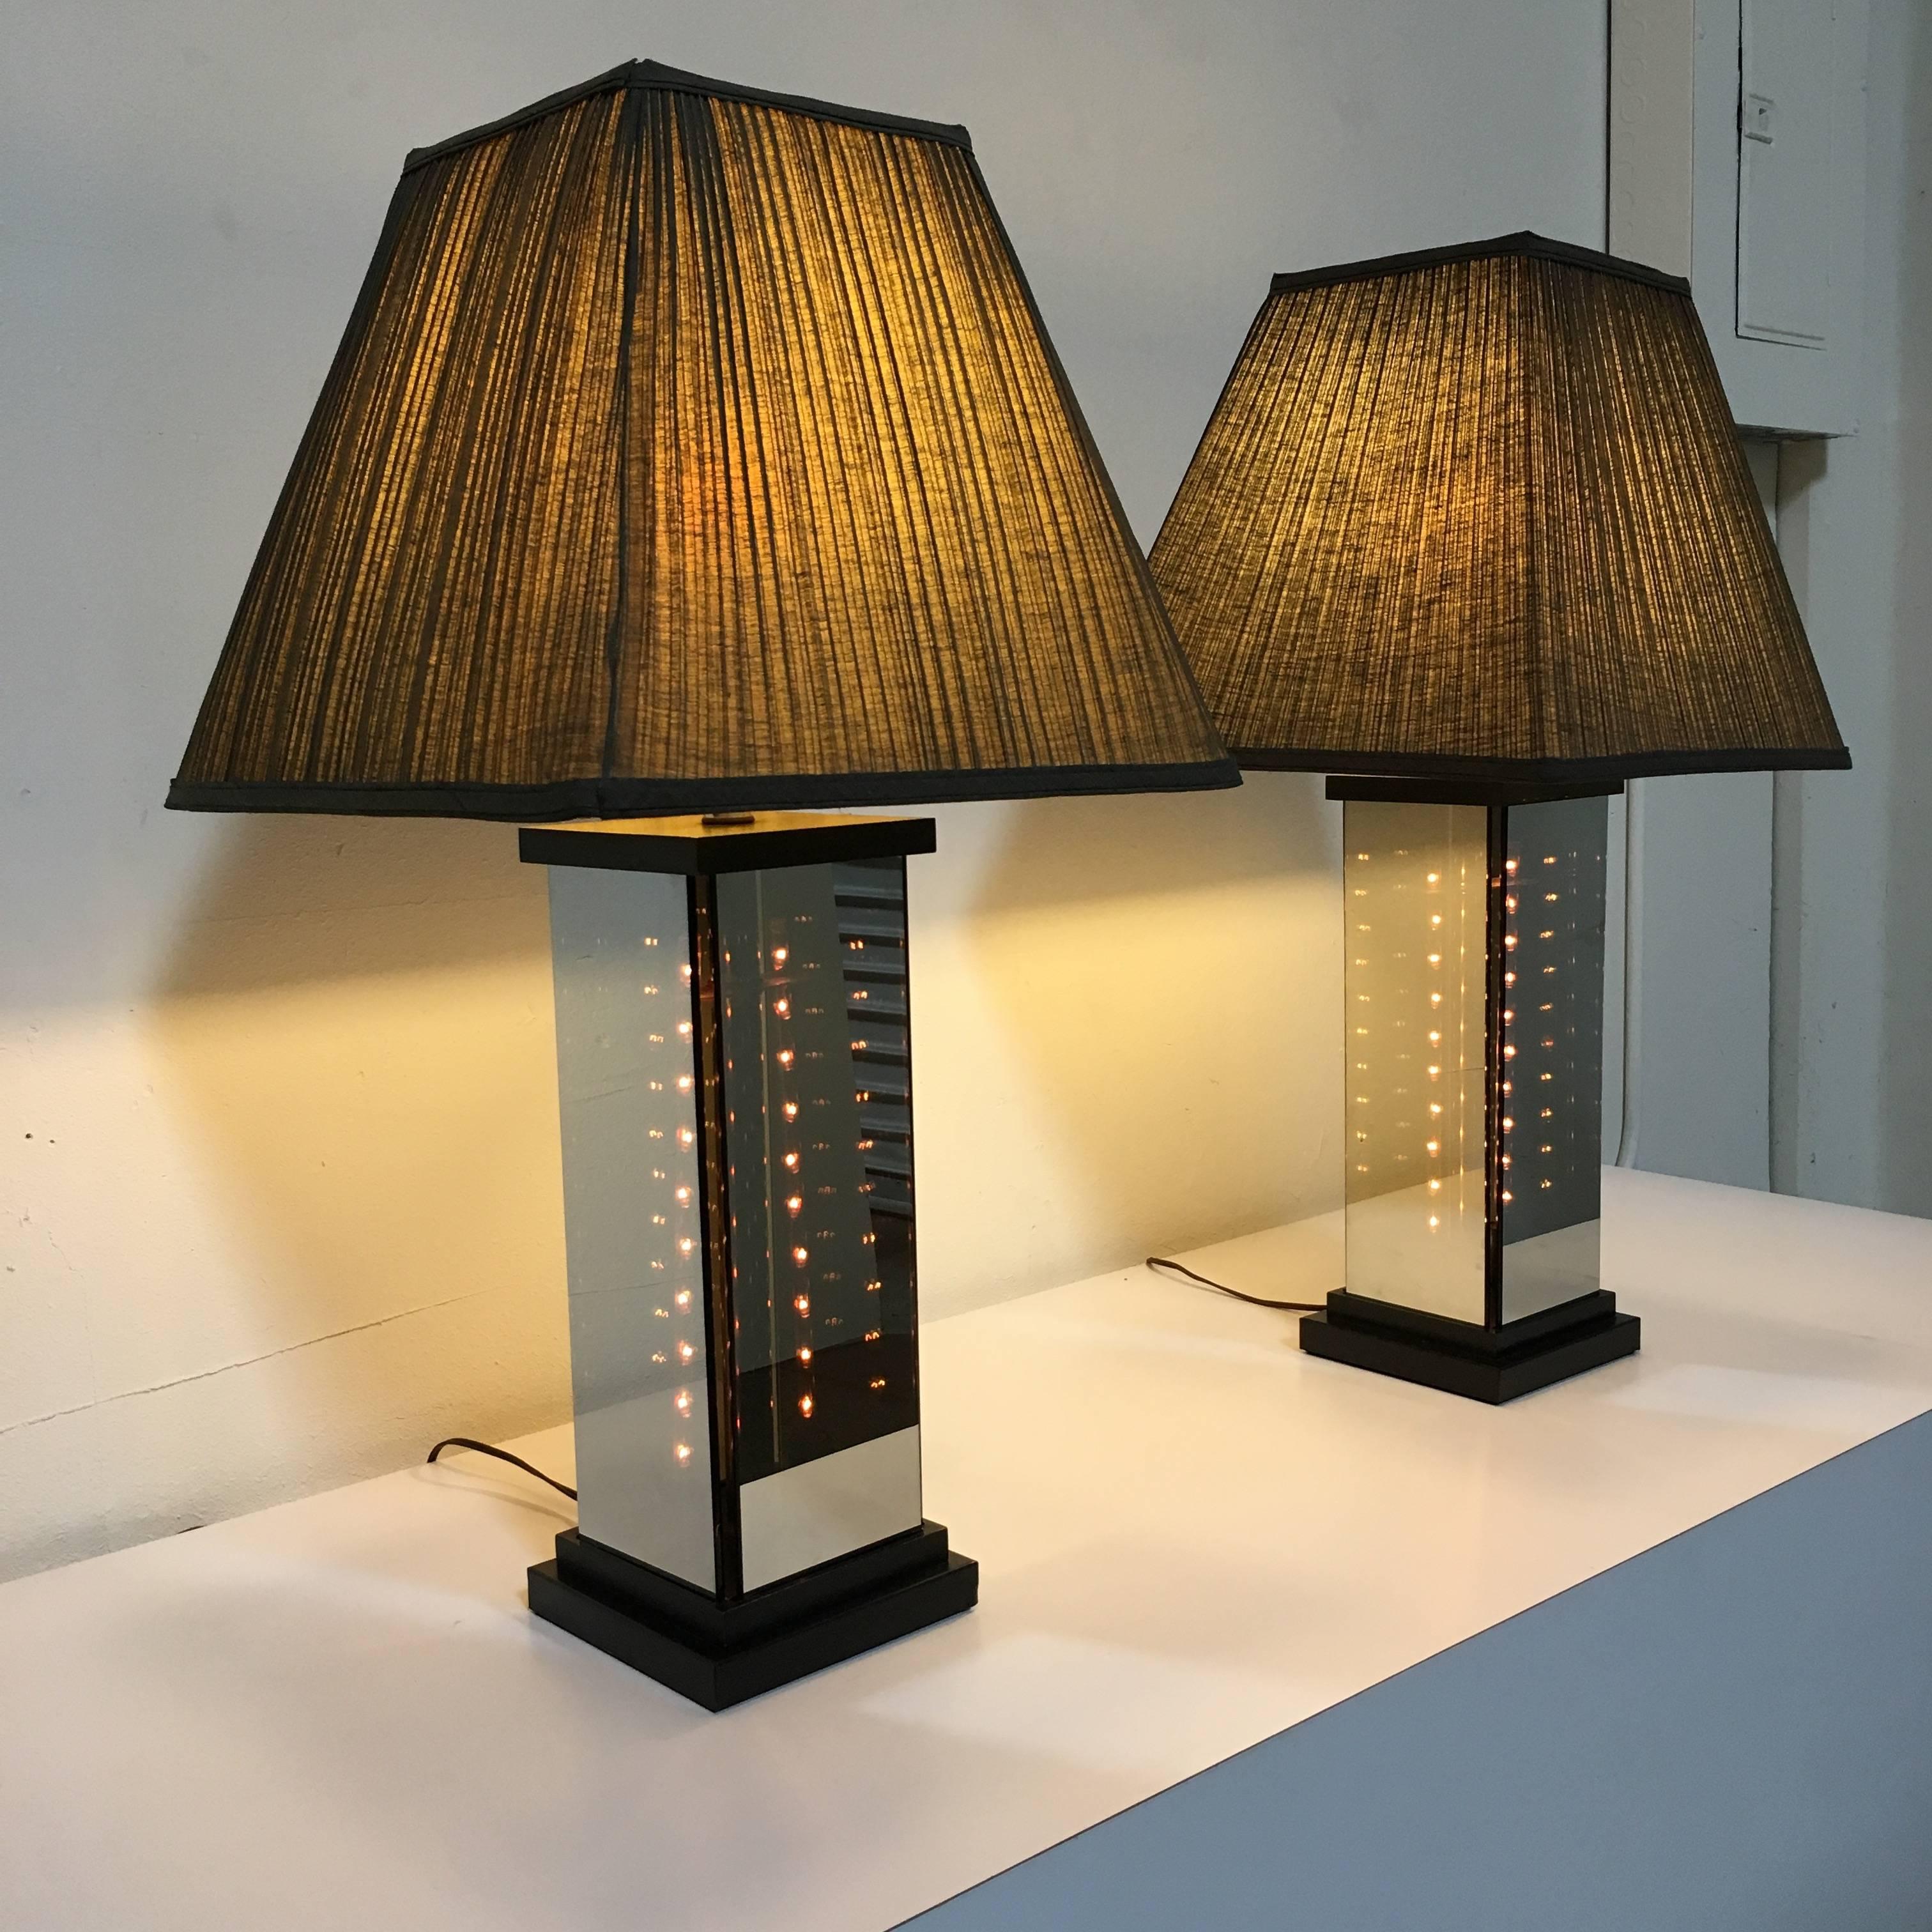 American Pair of 1970s Table Lamps by Liteline